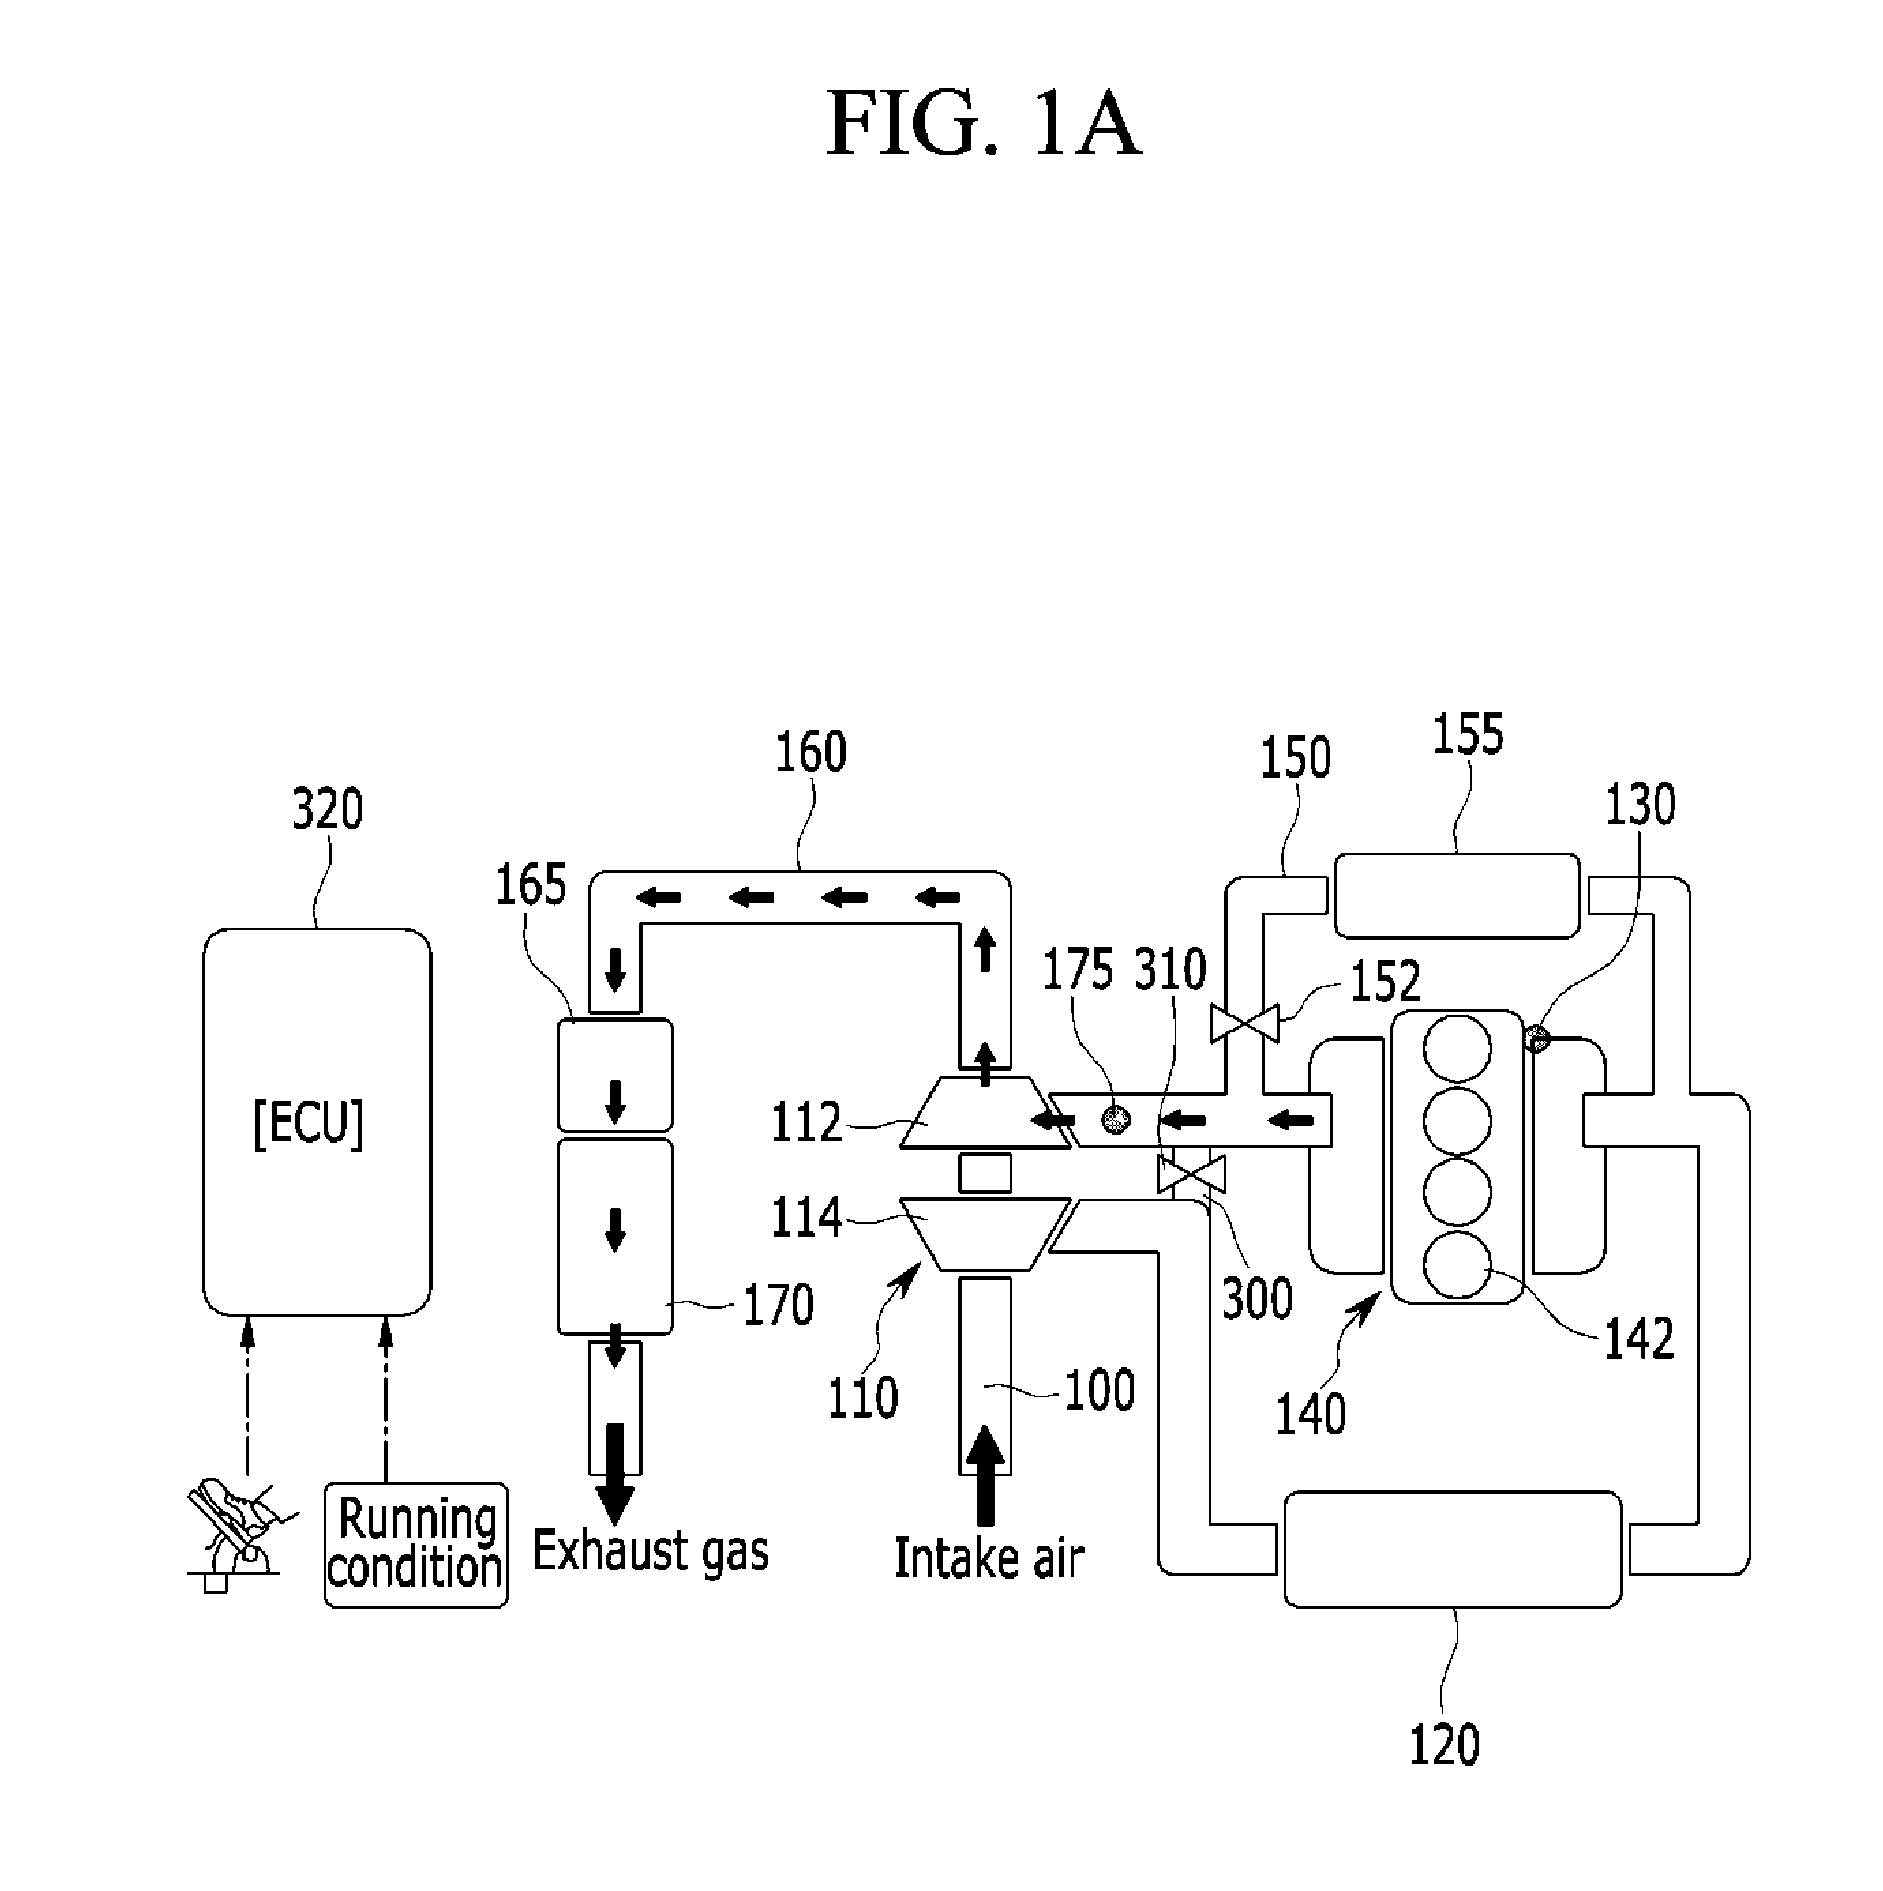 Engine system for controlling flow of exhaust gas